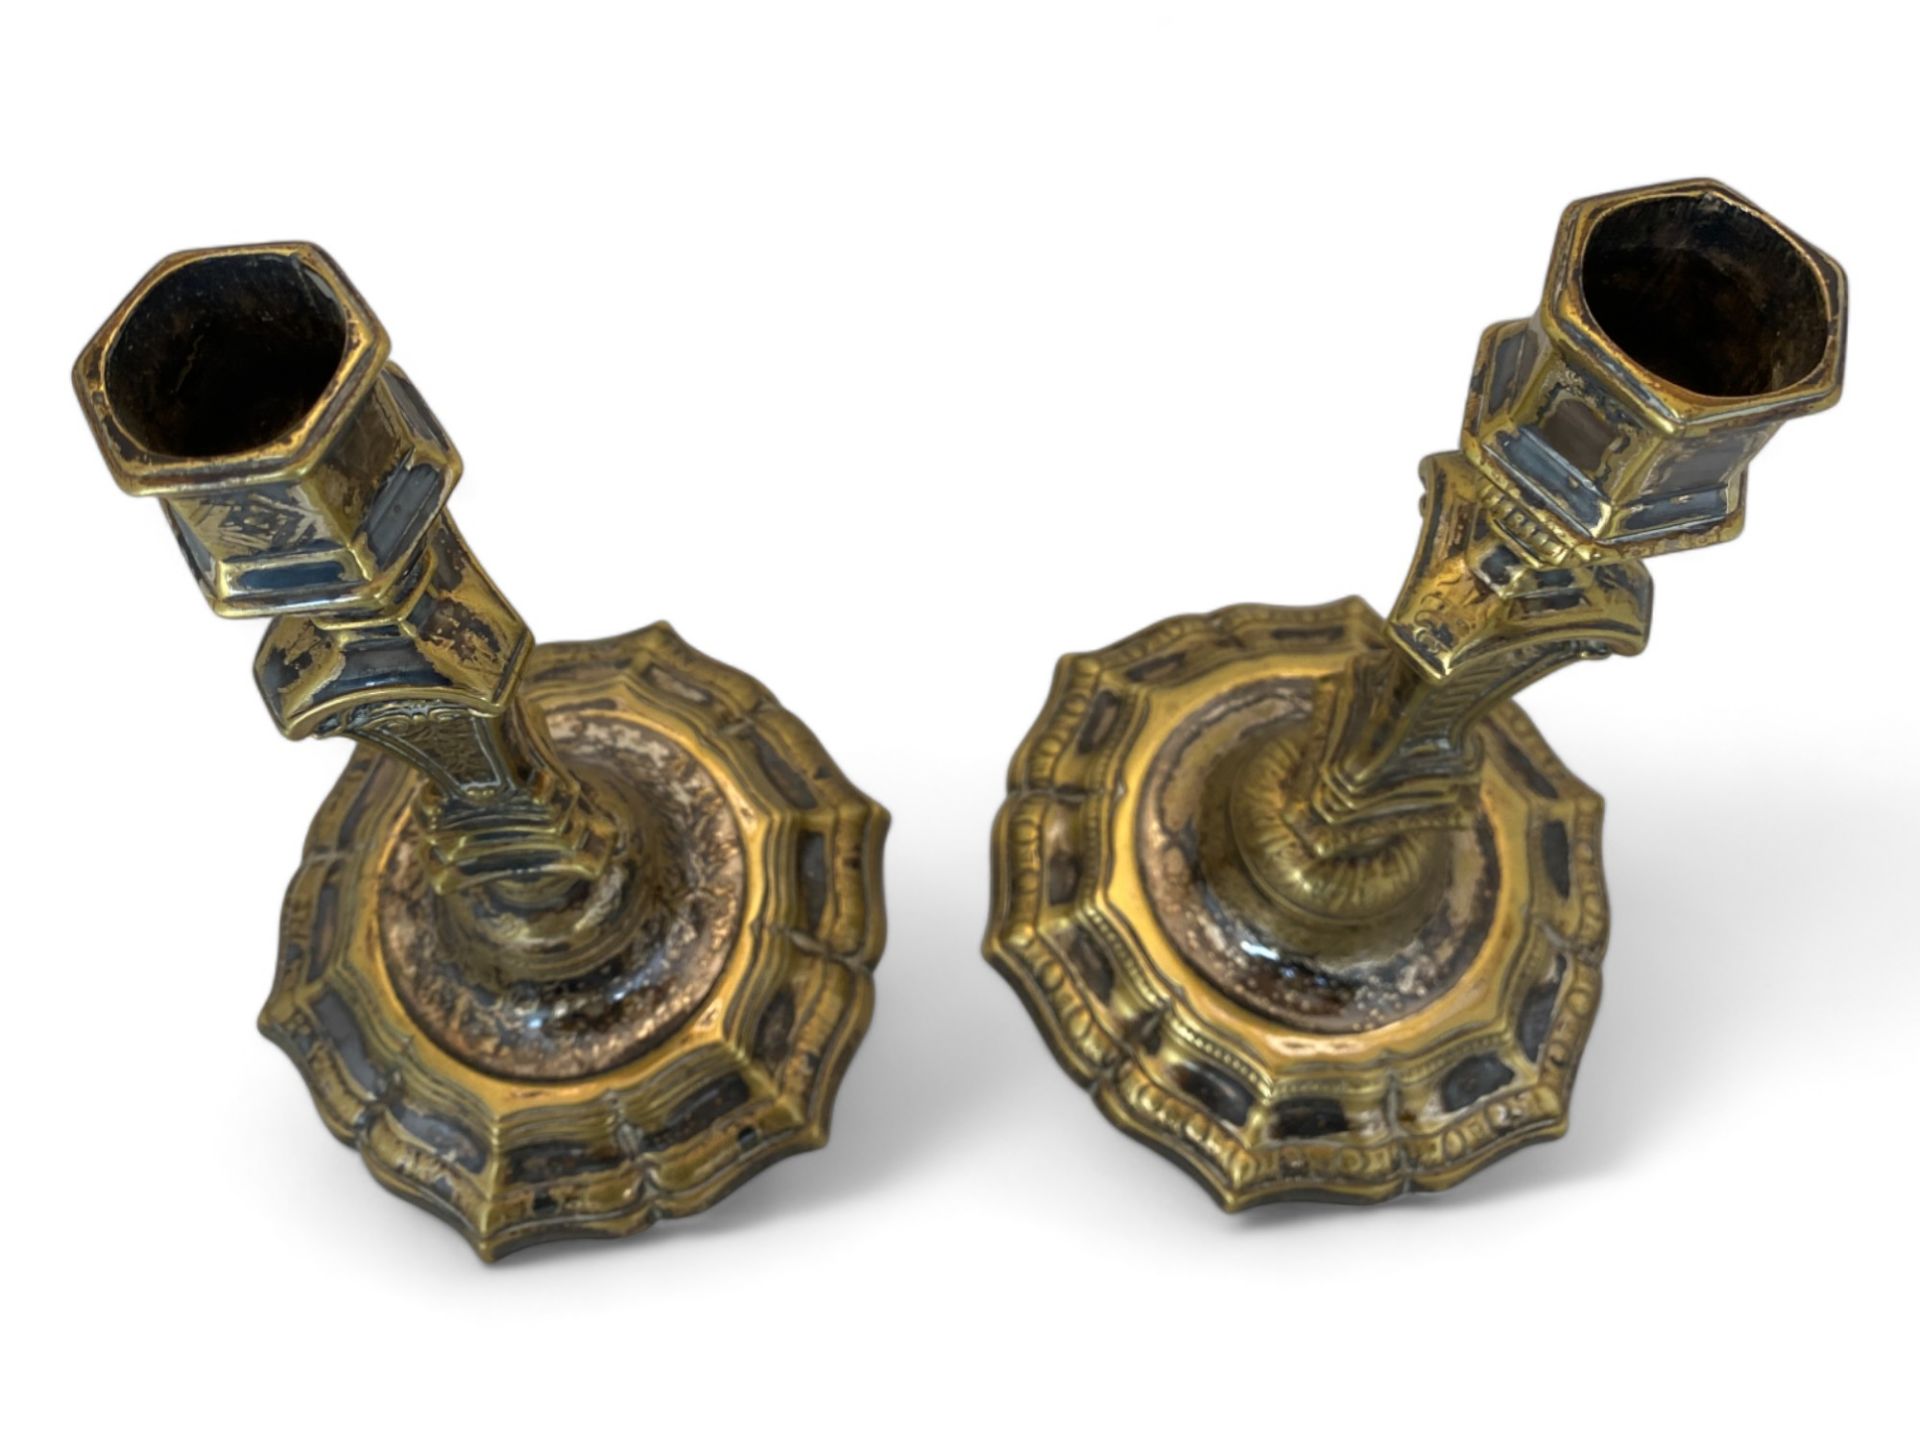 A closely matched pair of French Regence style silvered brass candlesticks, probably early 18th cent - Image 4 of 5